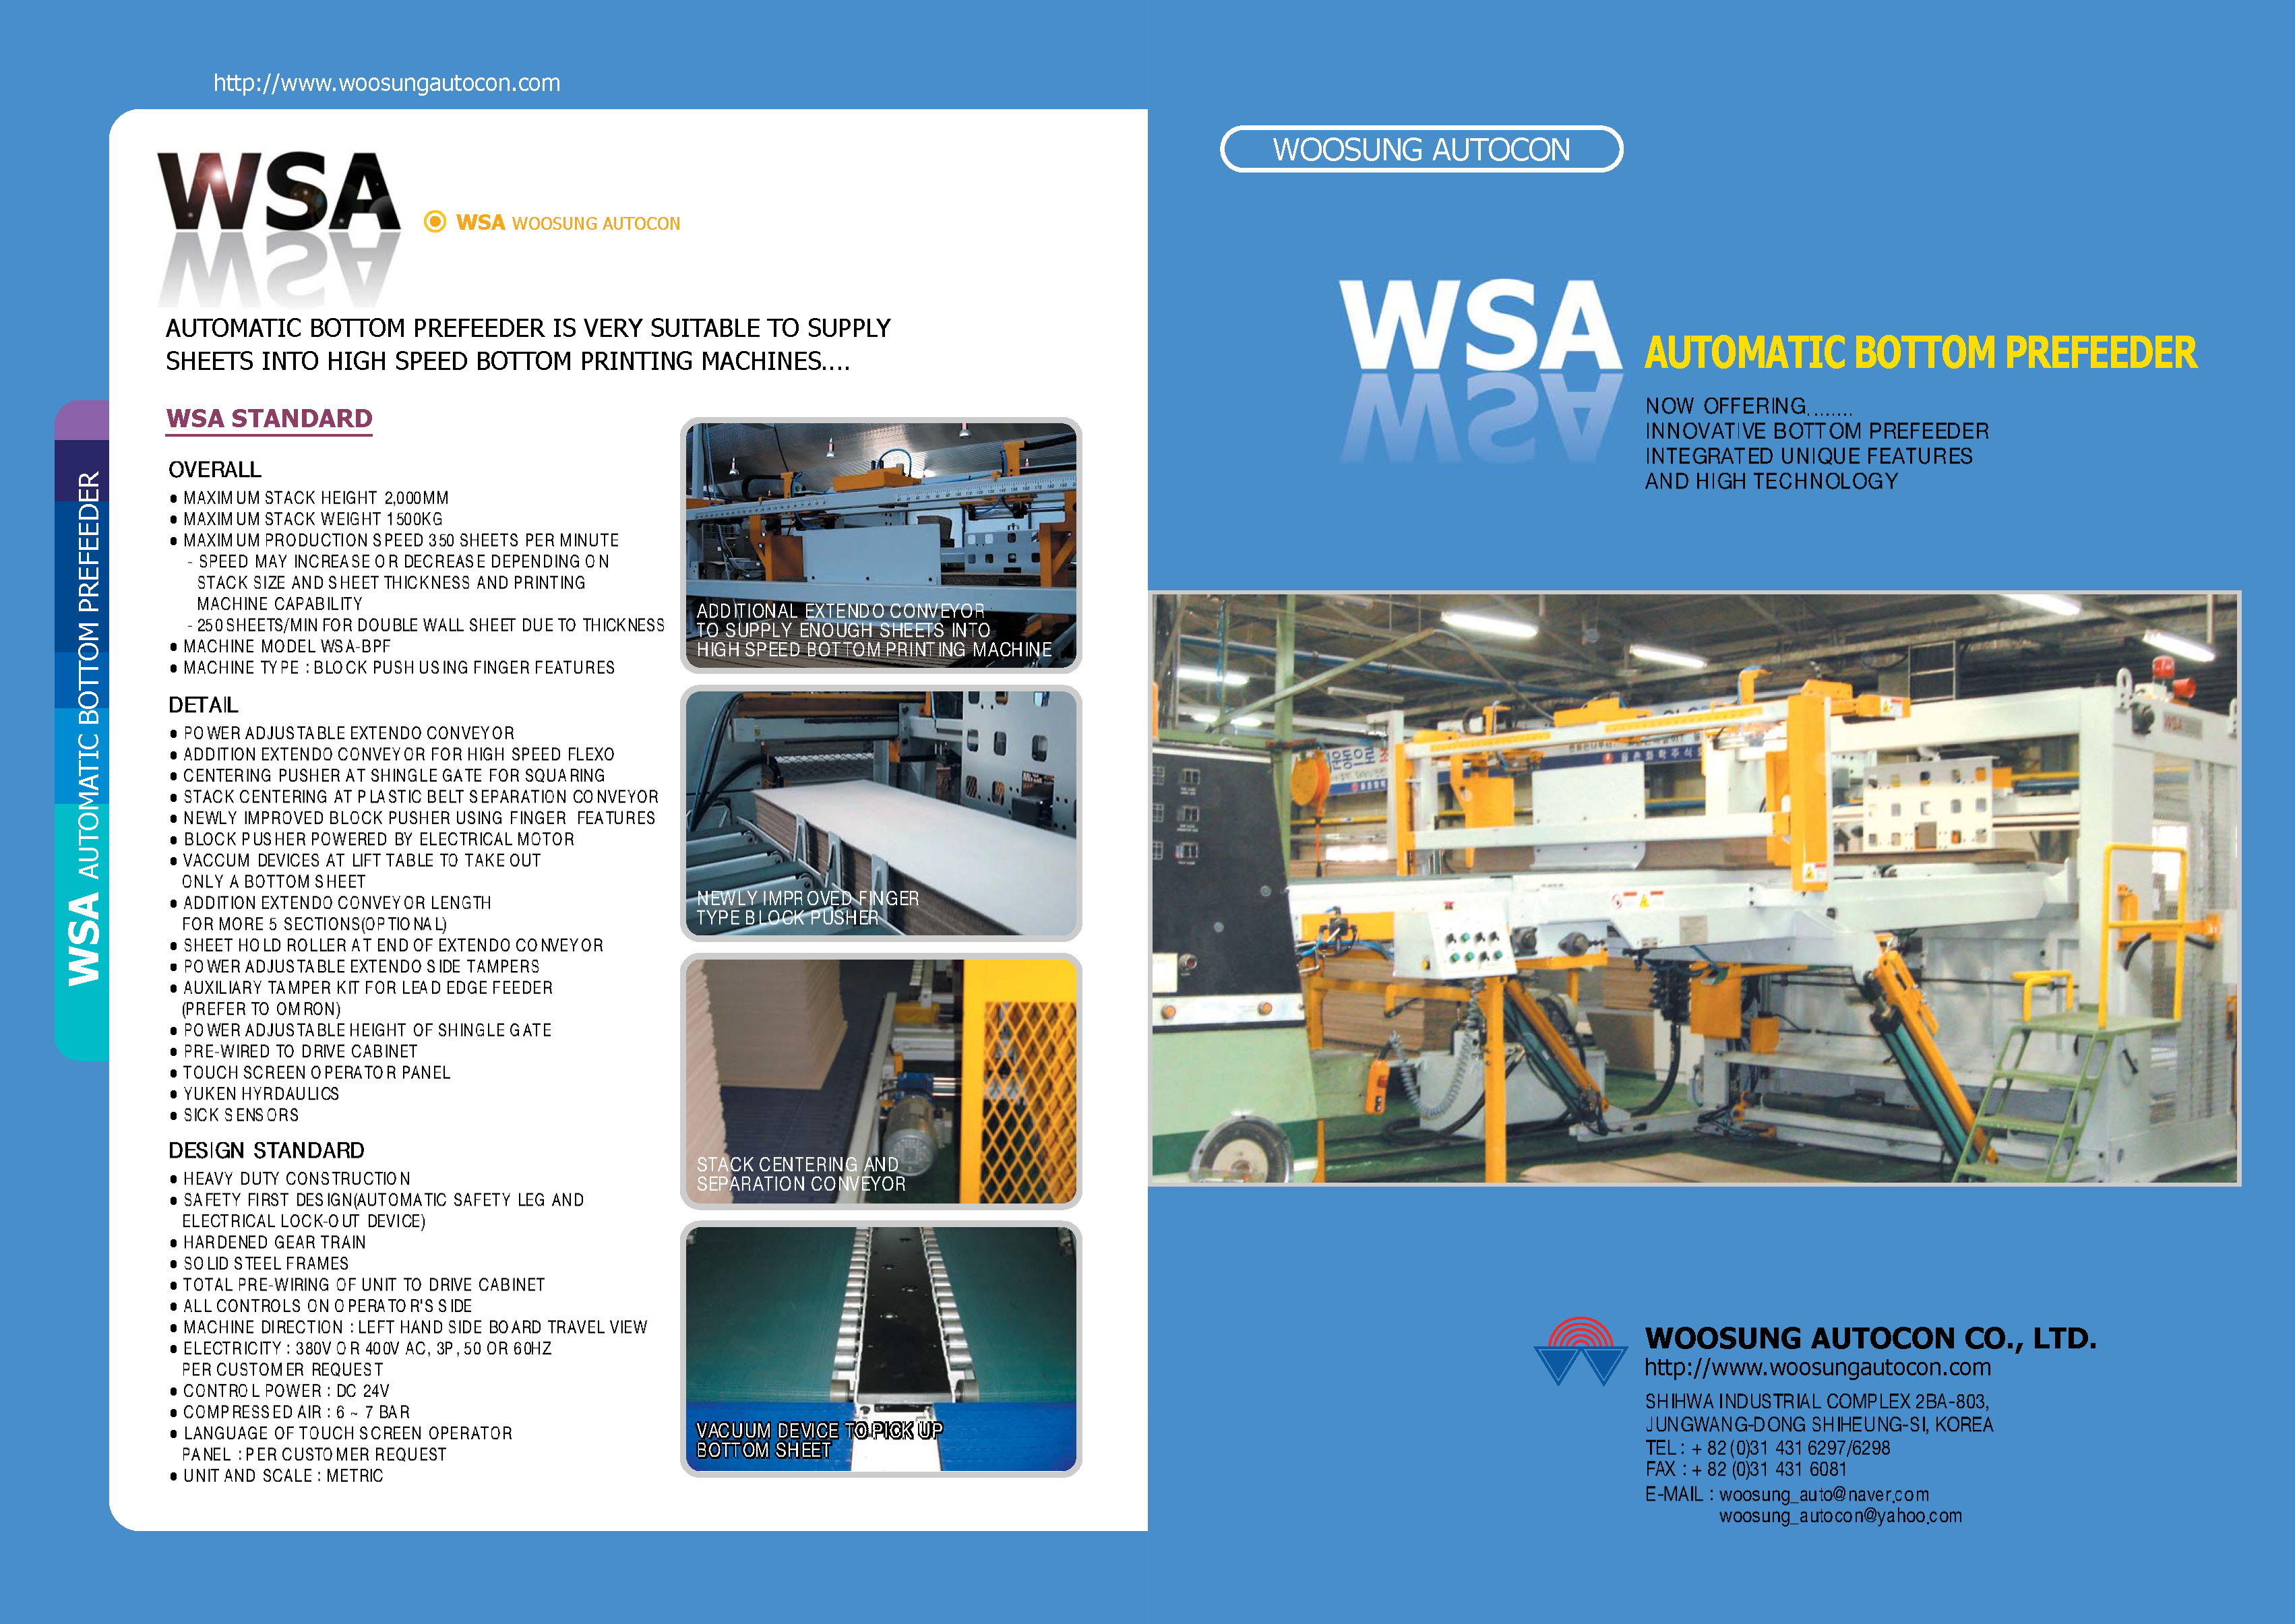 Learn more about WSA Bottom Print Prefeeders in the WSA Automatic Bottom Prefeeder Brochure 